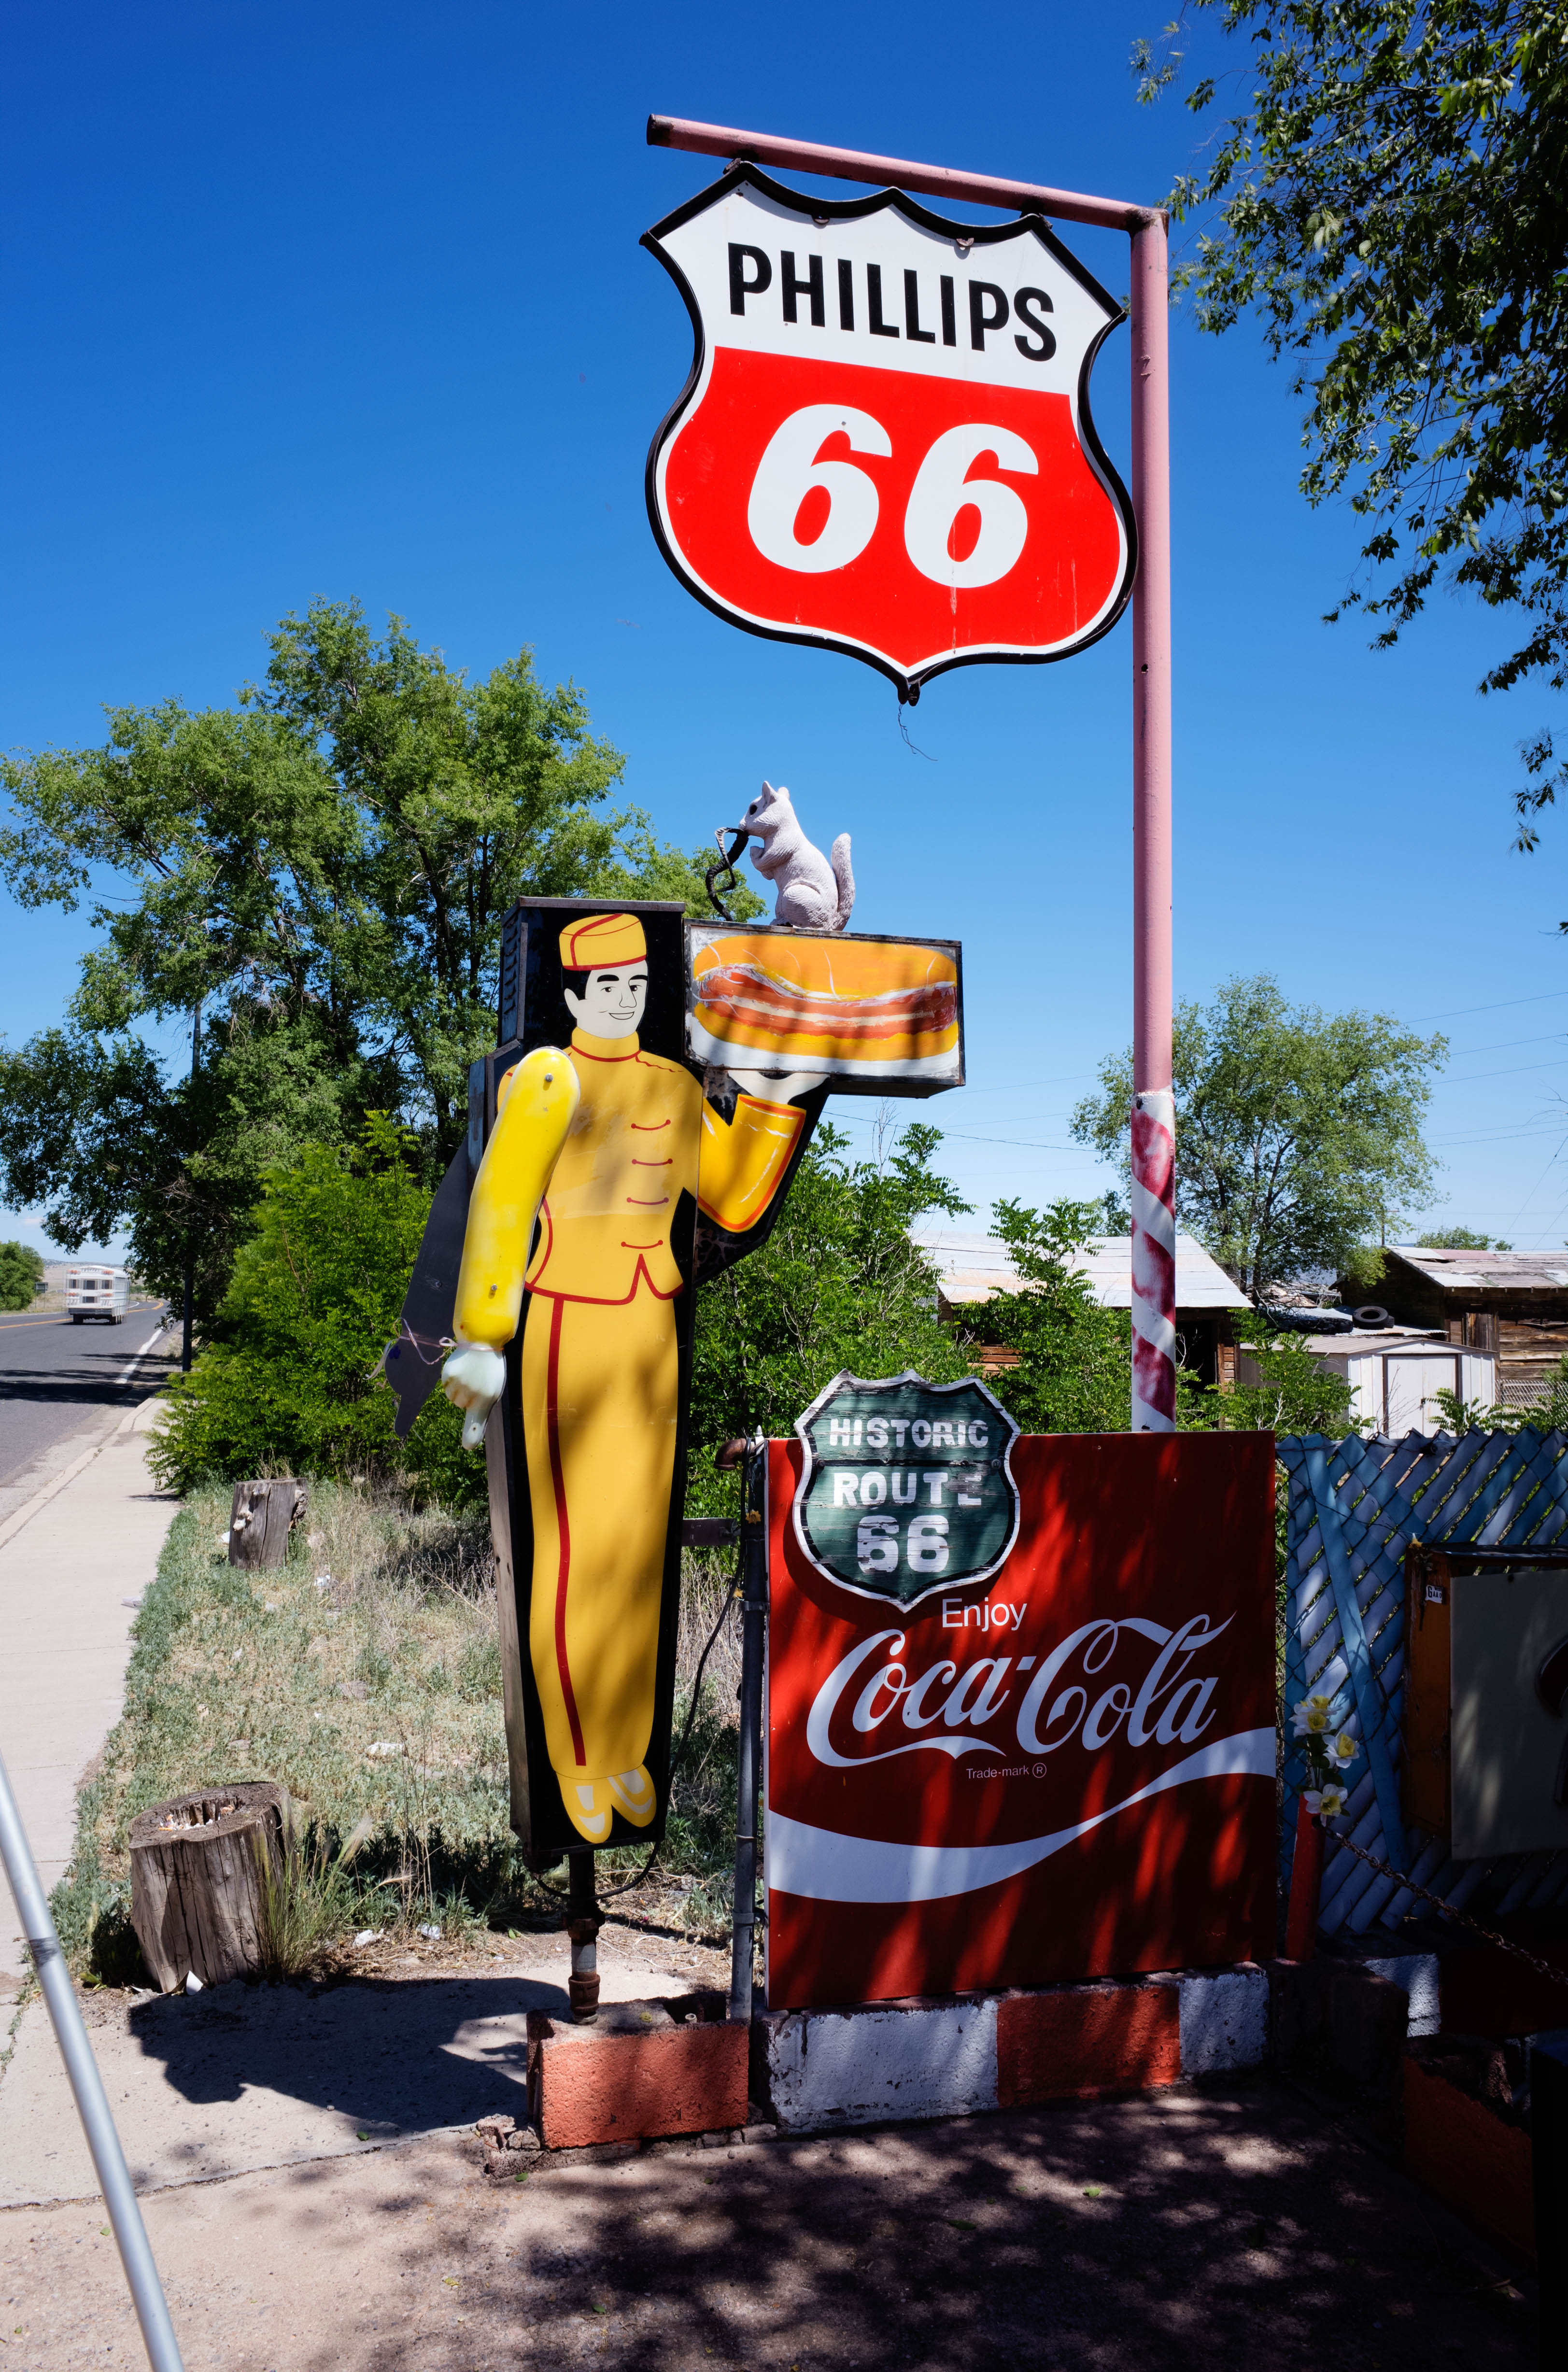 Phillips 66 on Route 66